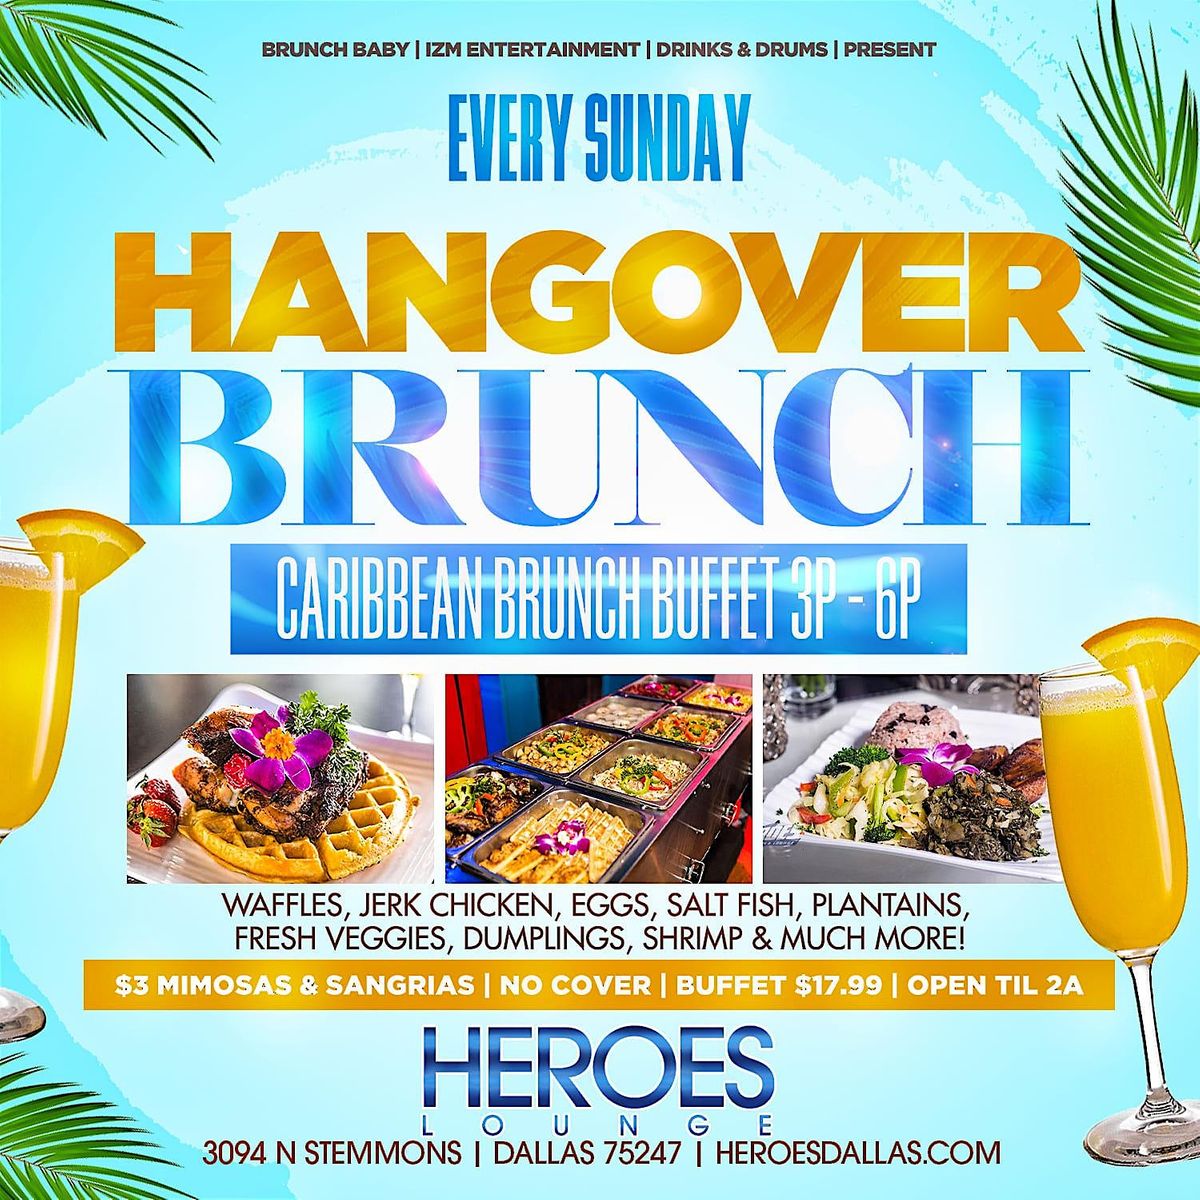 HANGOVER BRUNCH | Every Sunday 3p - 6p